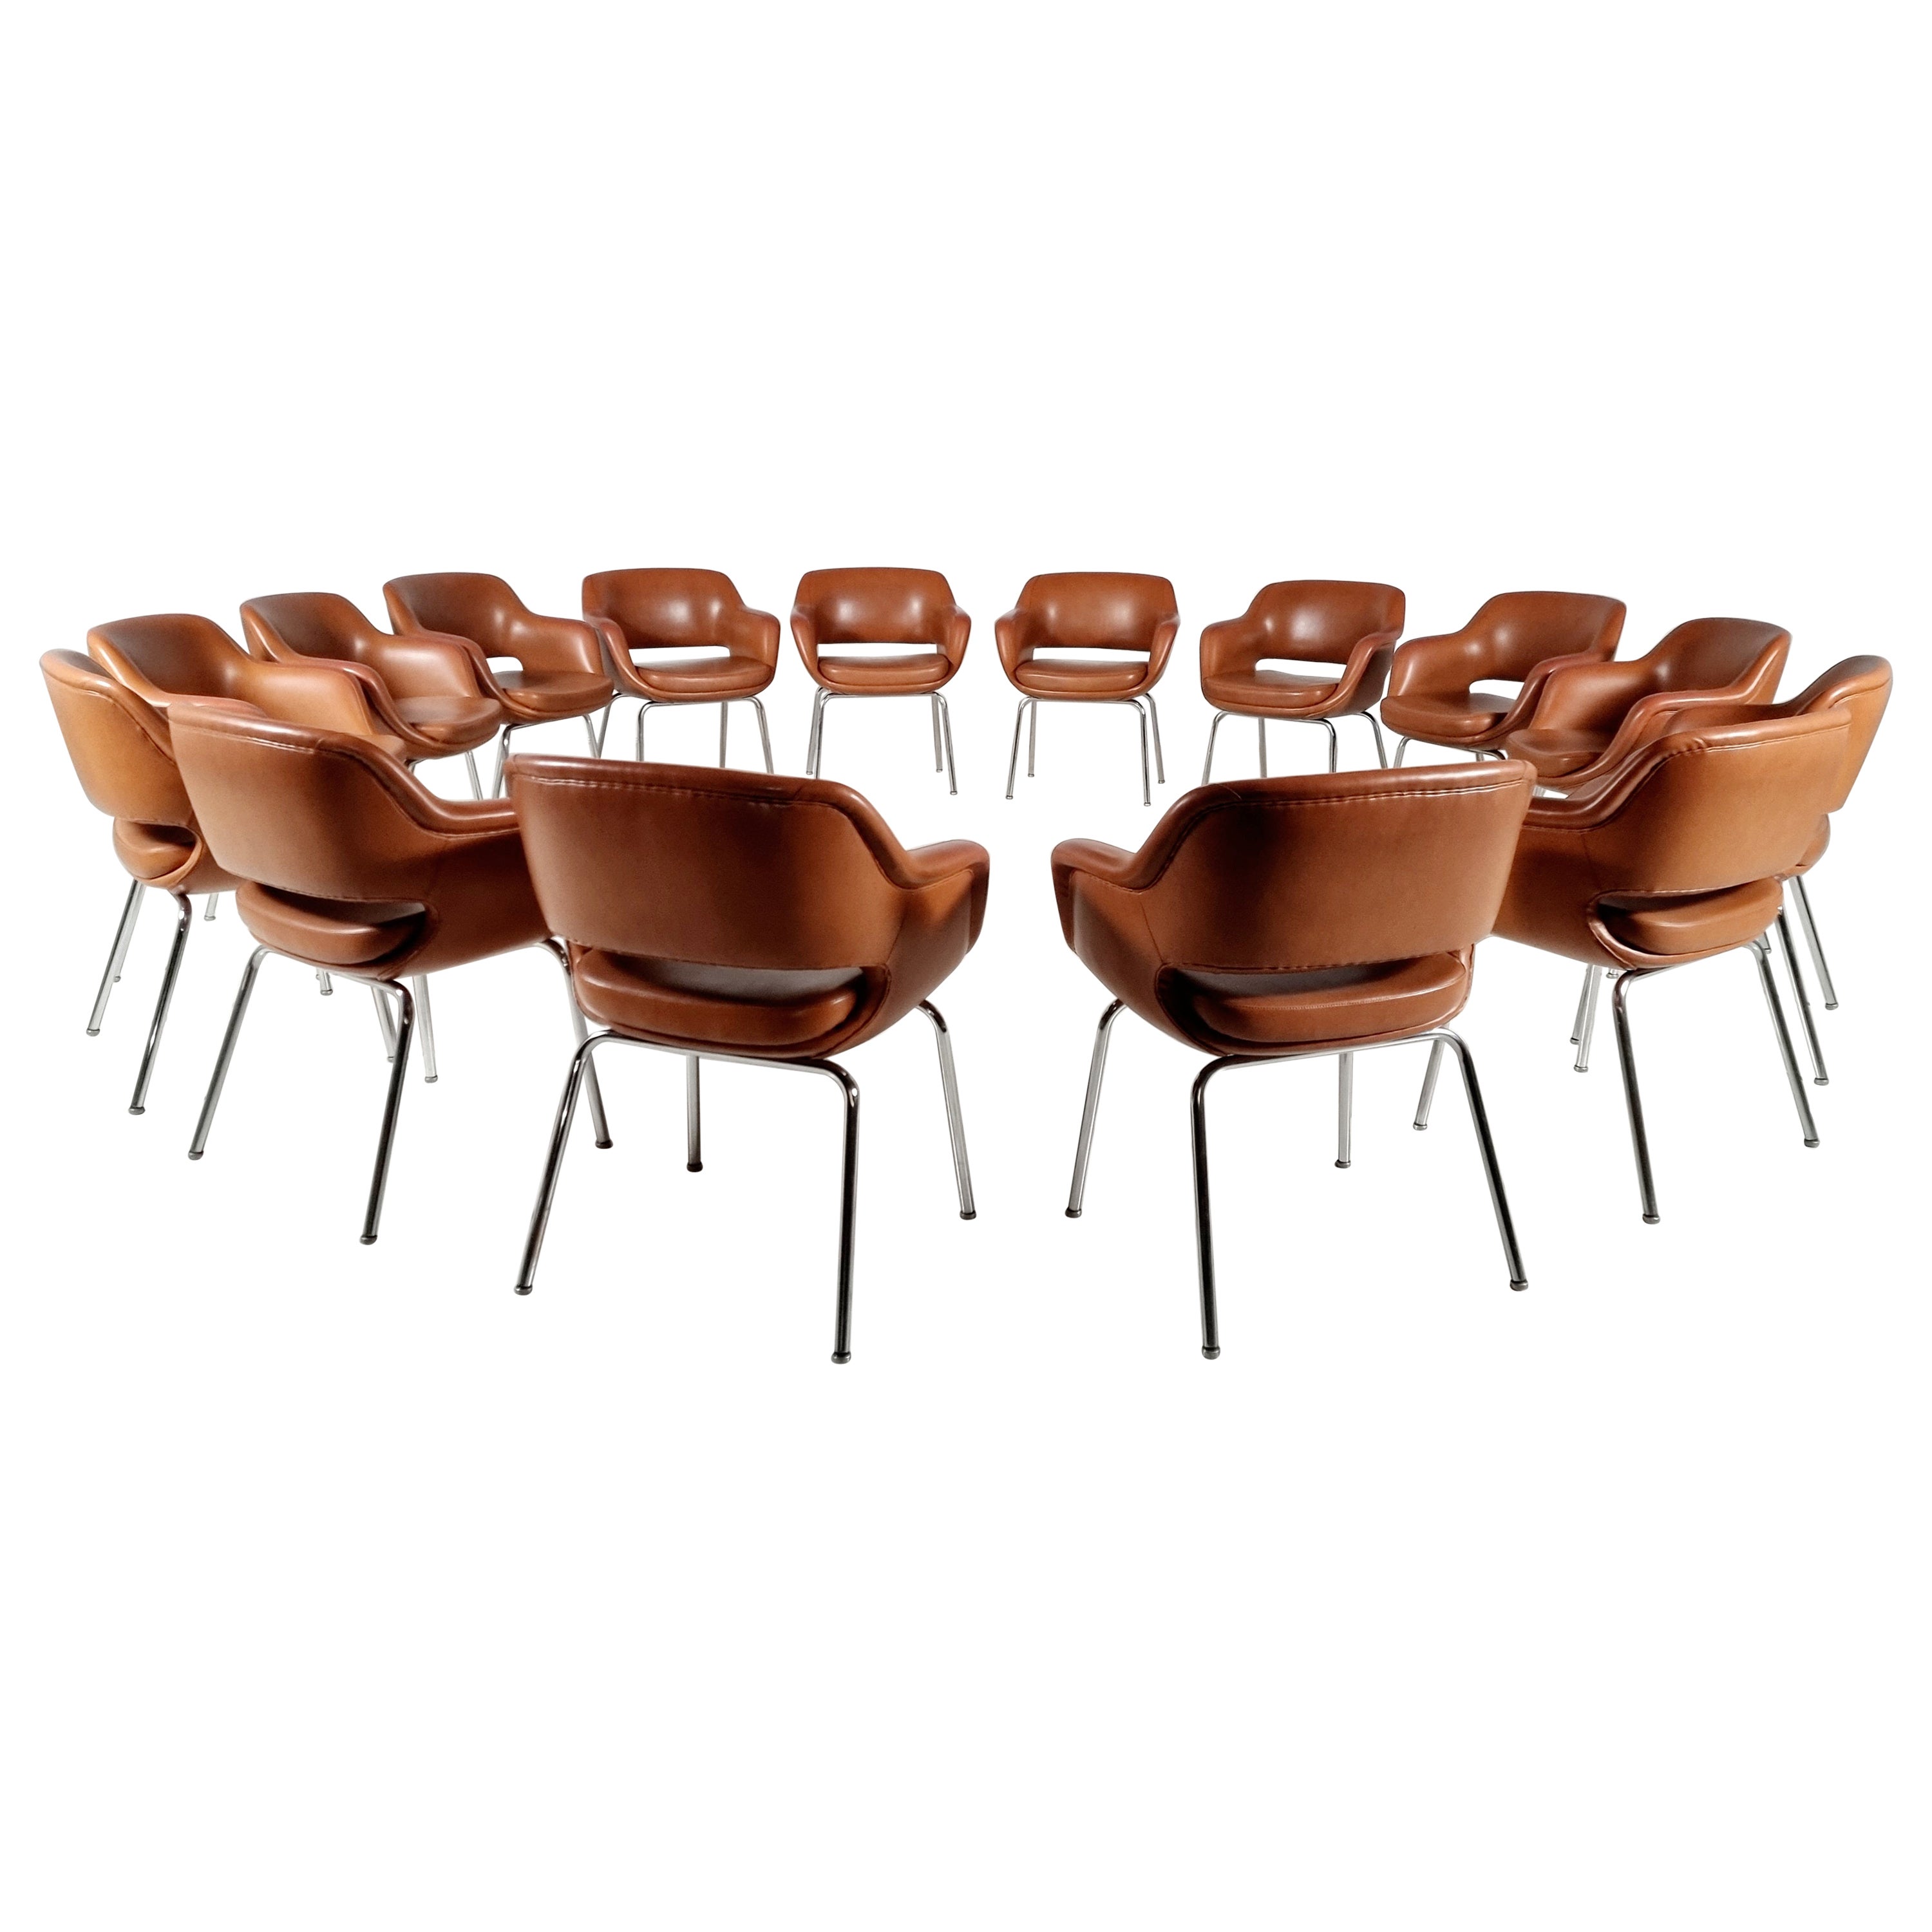 Set of 15 Kilta 'Model 1106/3' Chairs by Olli Mannermaa for Cassina, 1960s  at 1stDibs